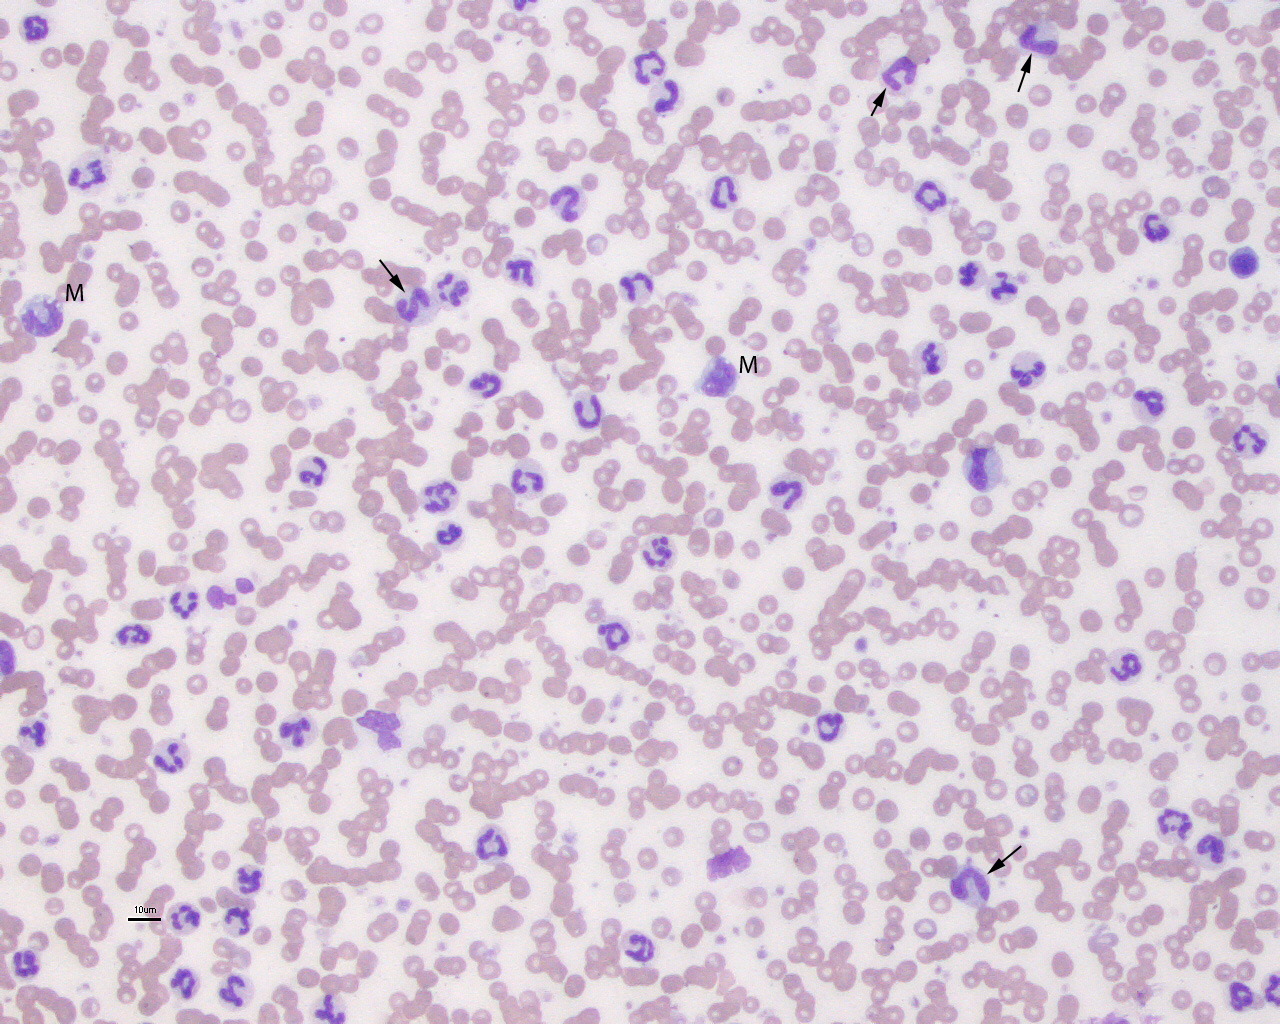 What can cause low lymphocytes and high neutrophils?